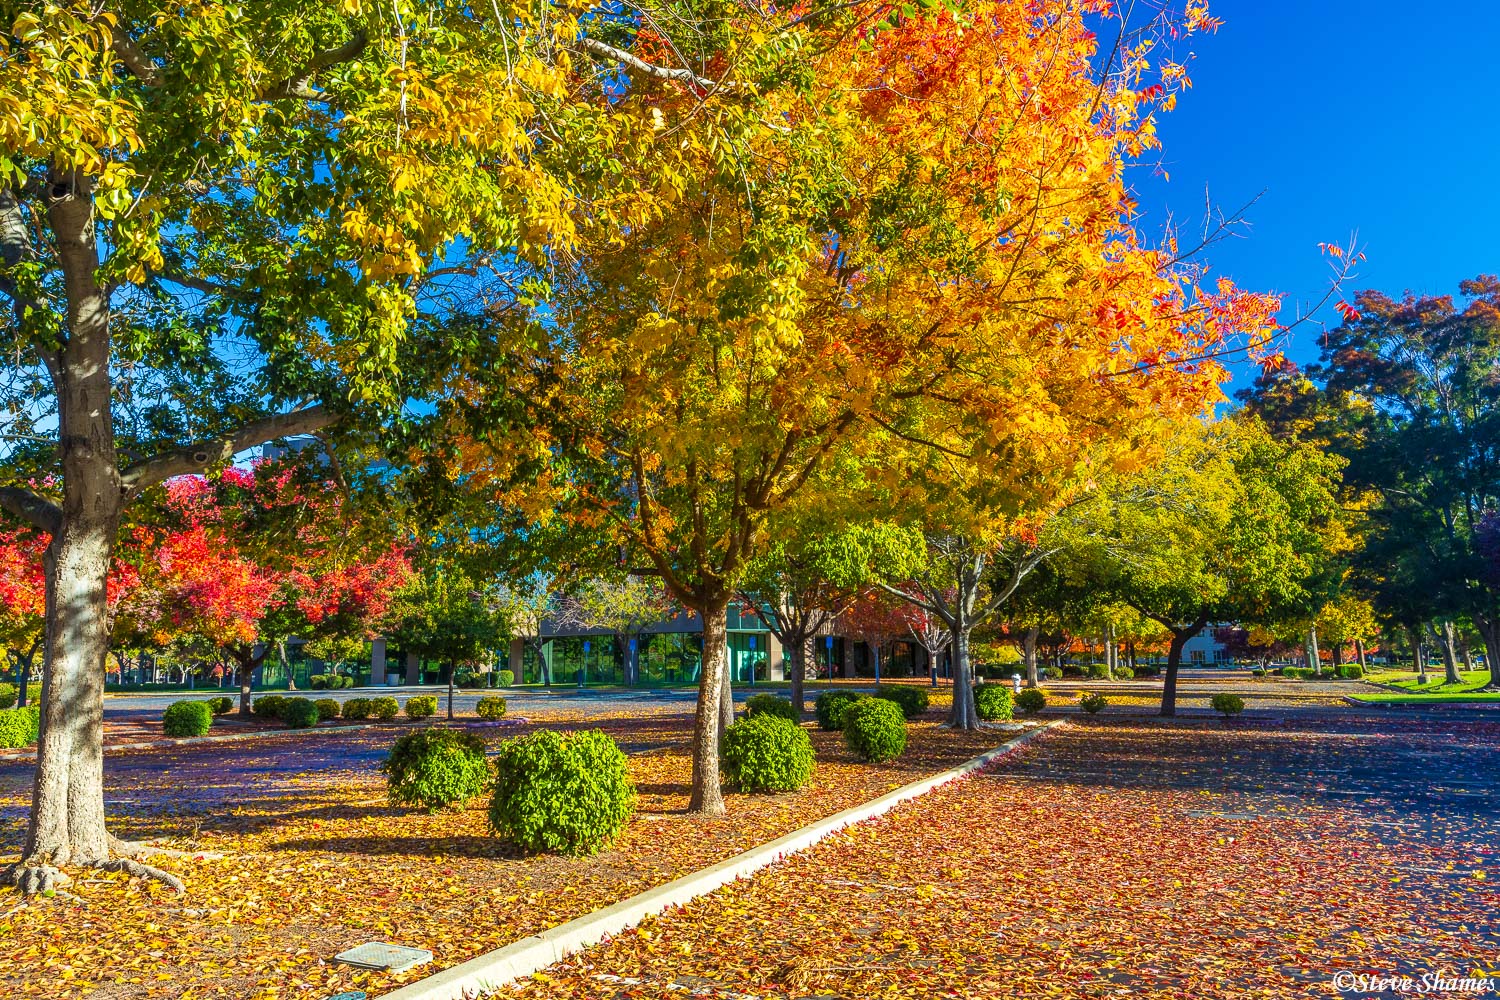 About the only time I stray away from nature and landscape, is in the fall, when some of the business parks really light up with...